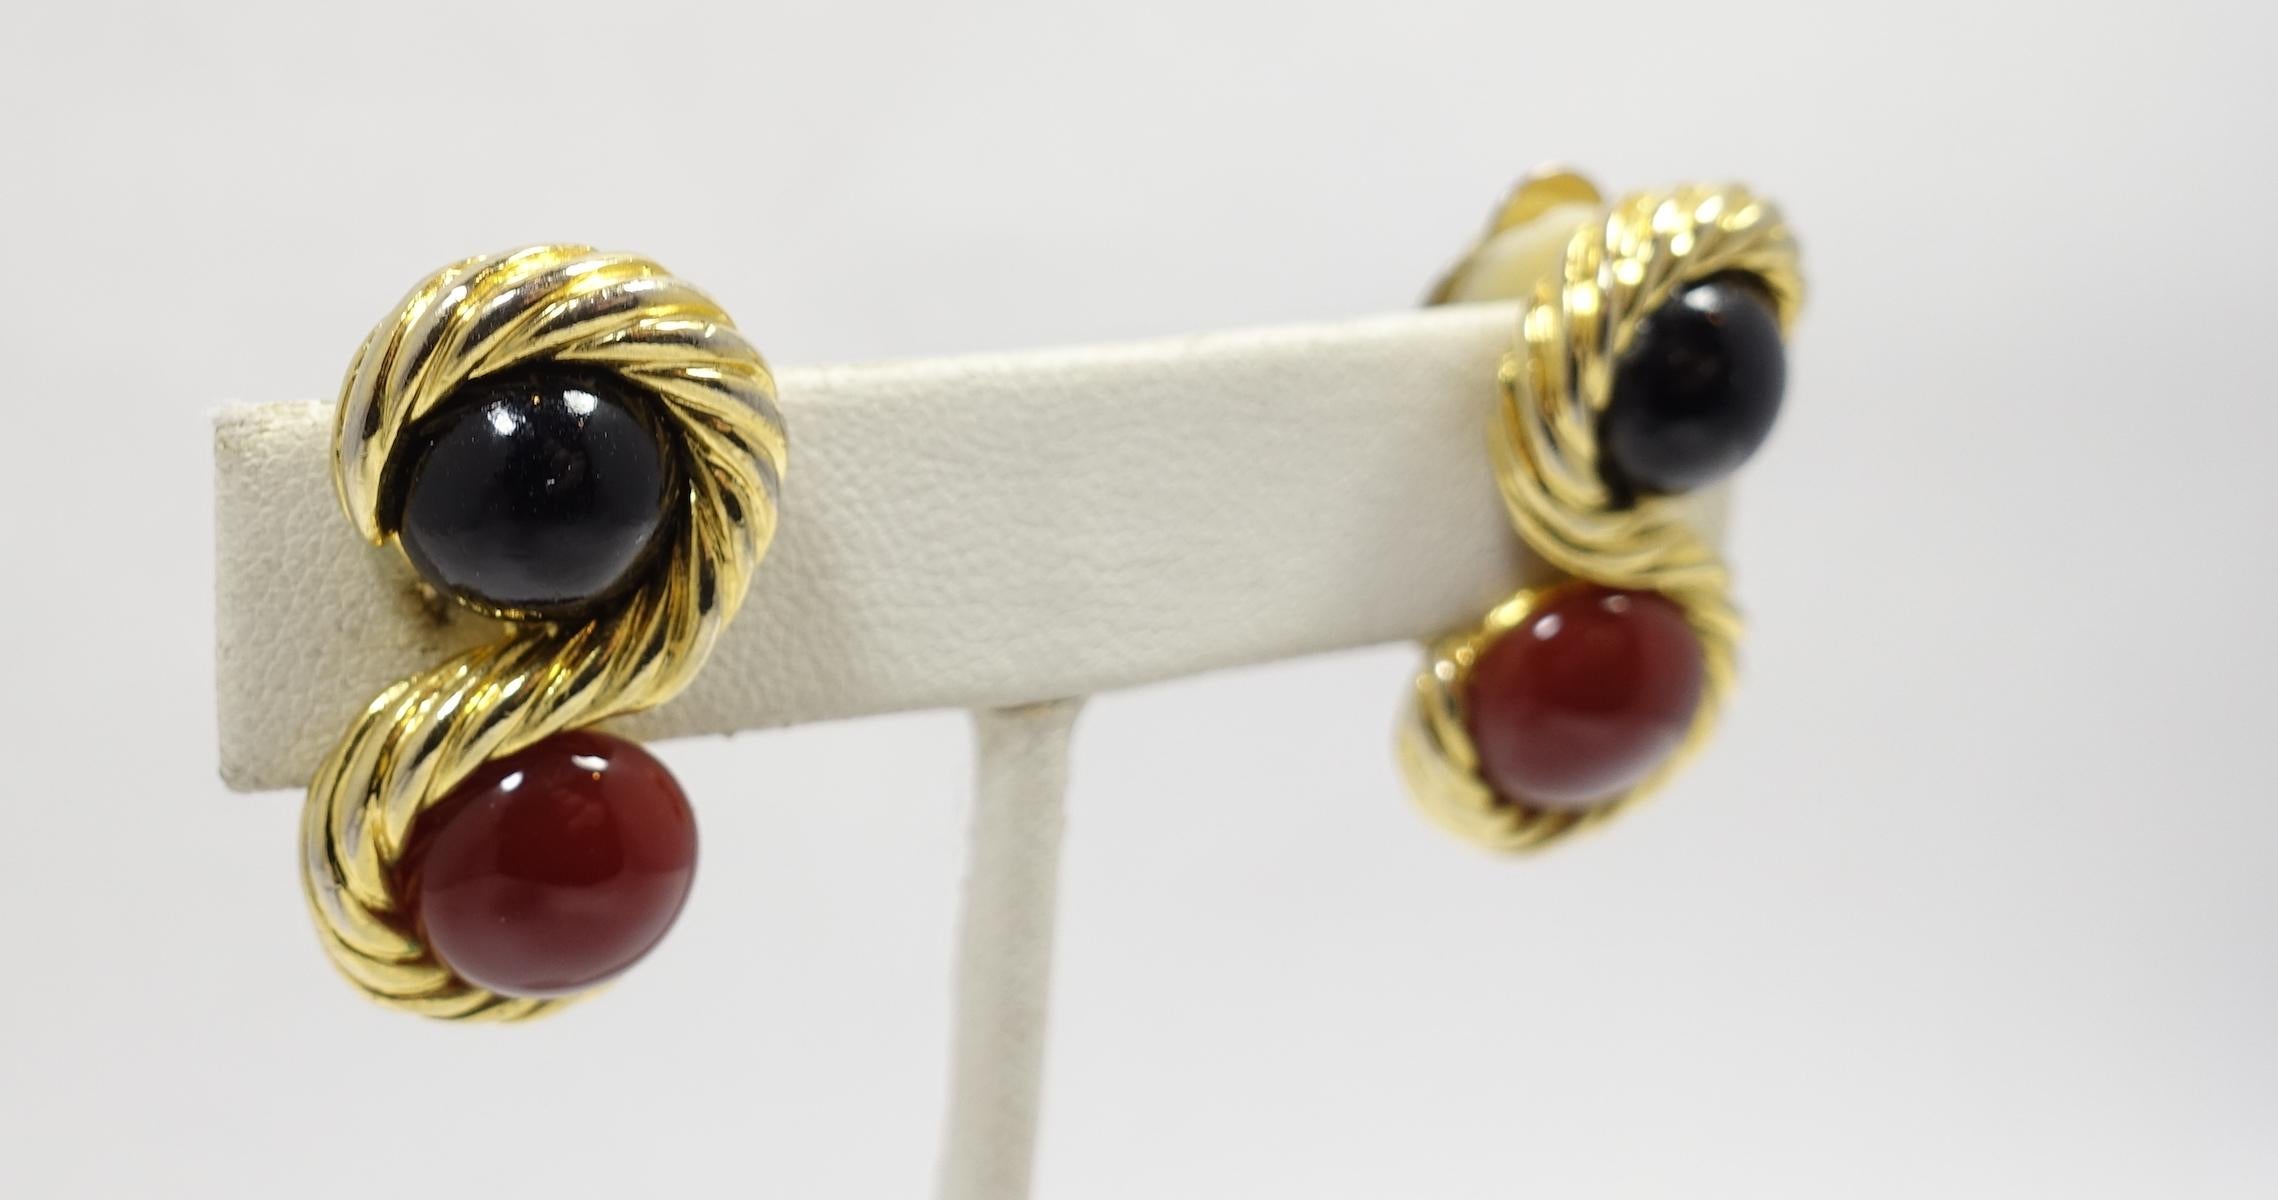 These vintage earrings feature cabochon  faux carnelian and blue stones in a gold tone setting.  These clip earrings measure 1-1/8” x 1/2” and are in excellent condition.